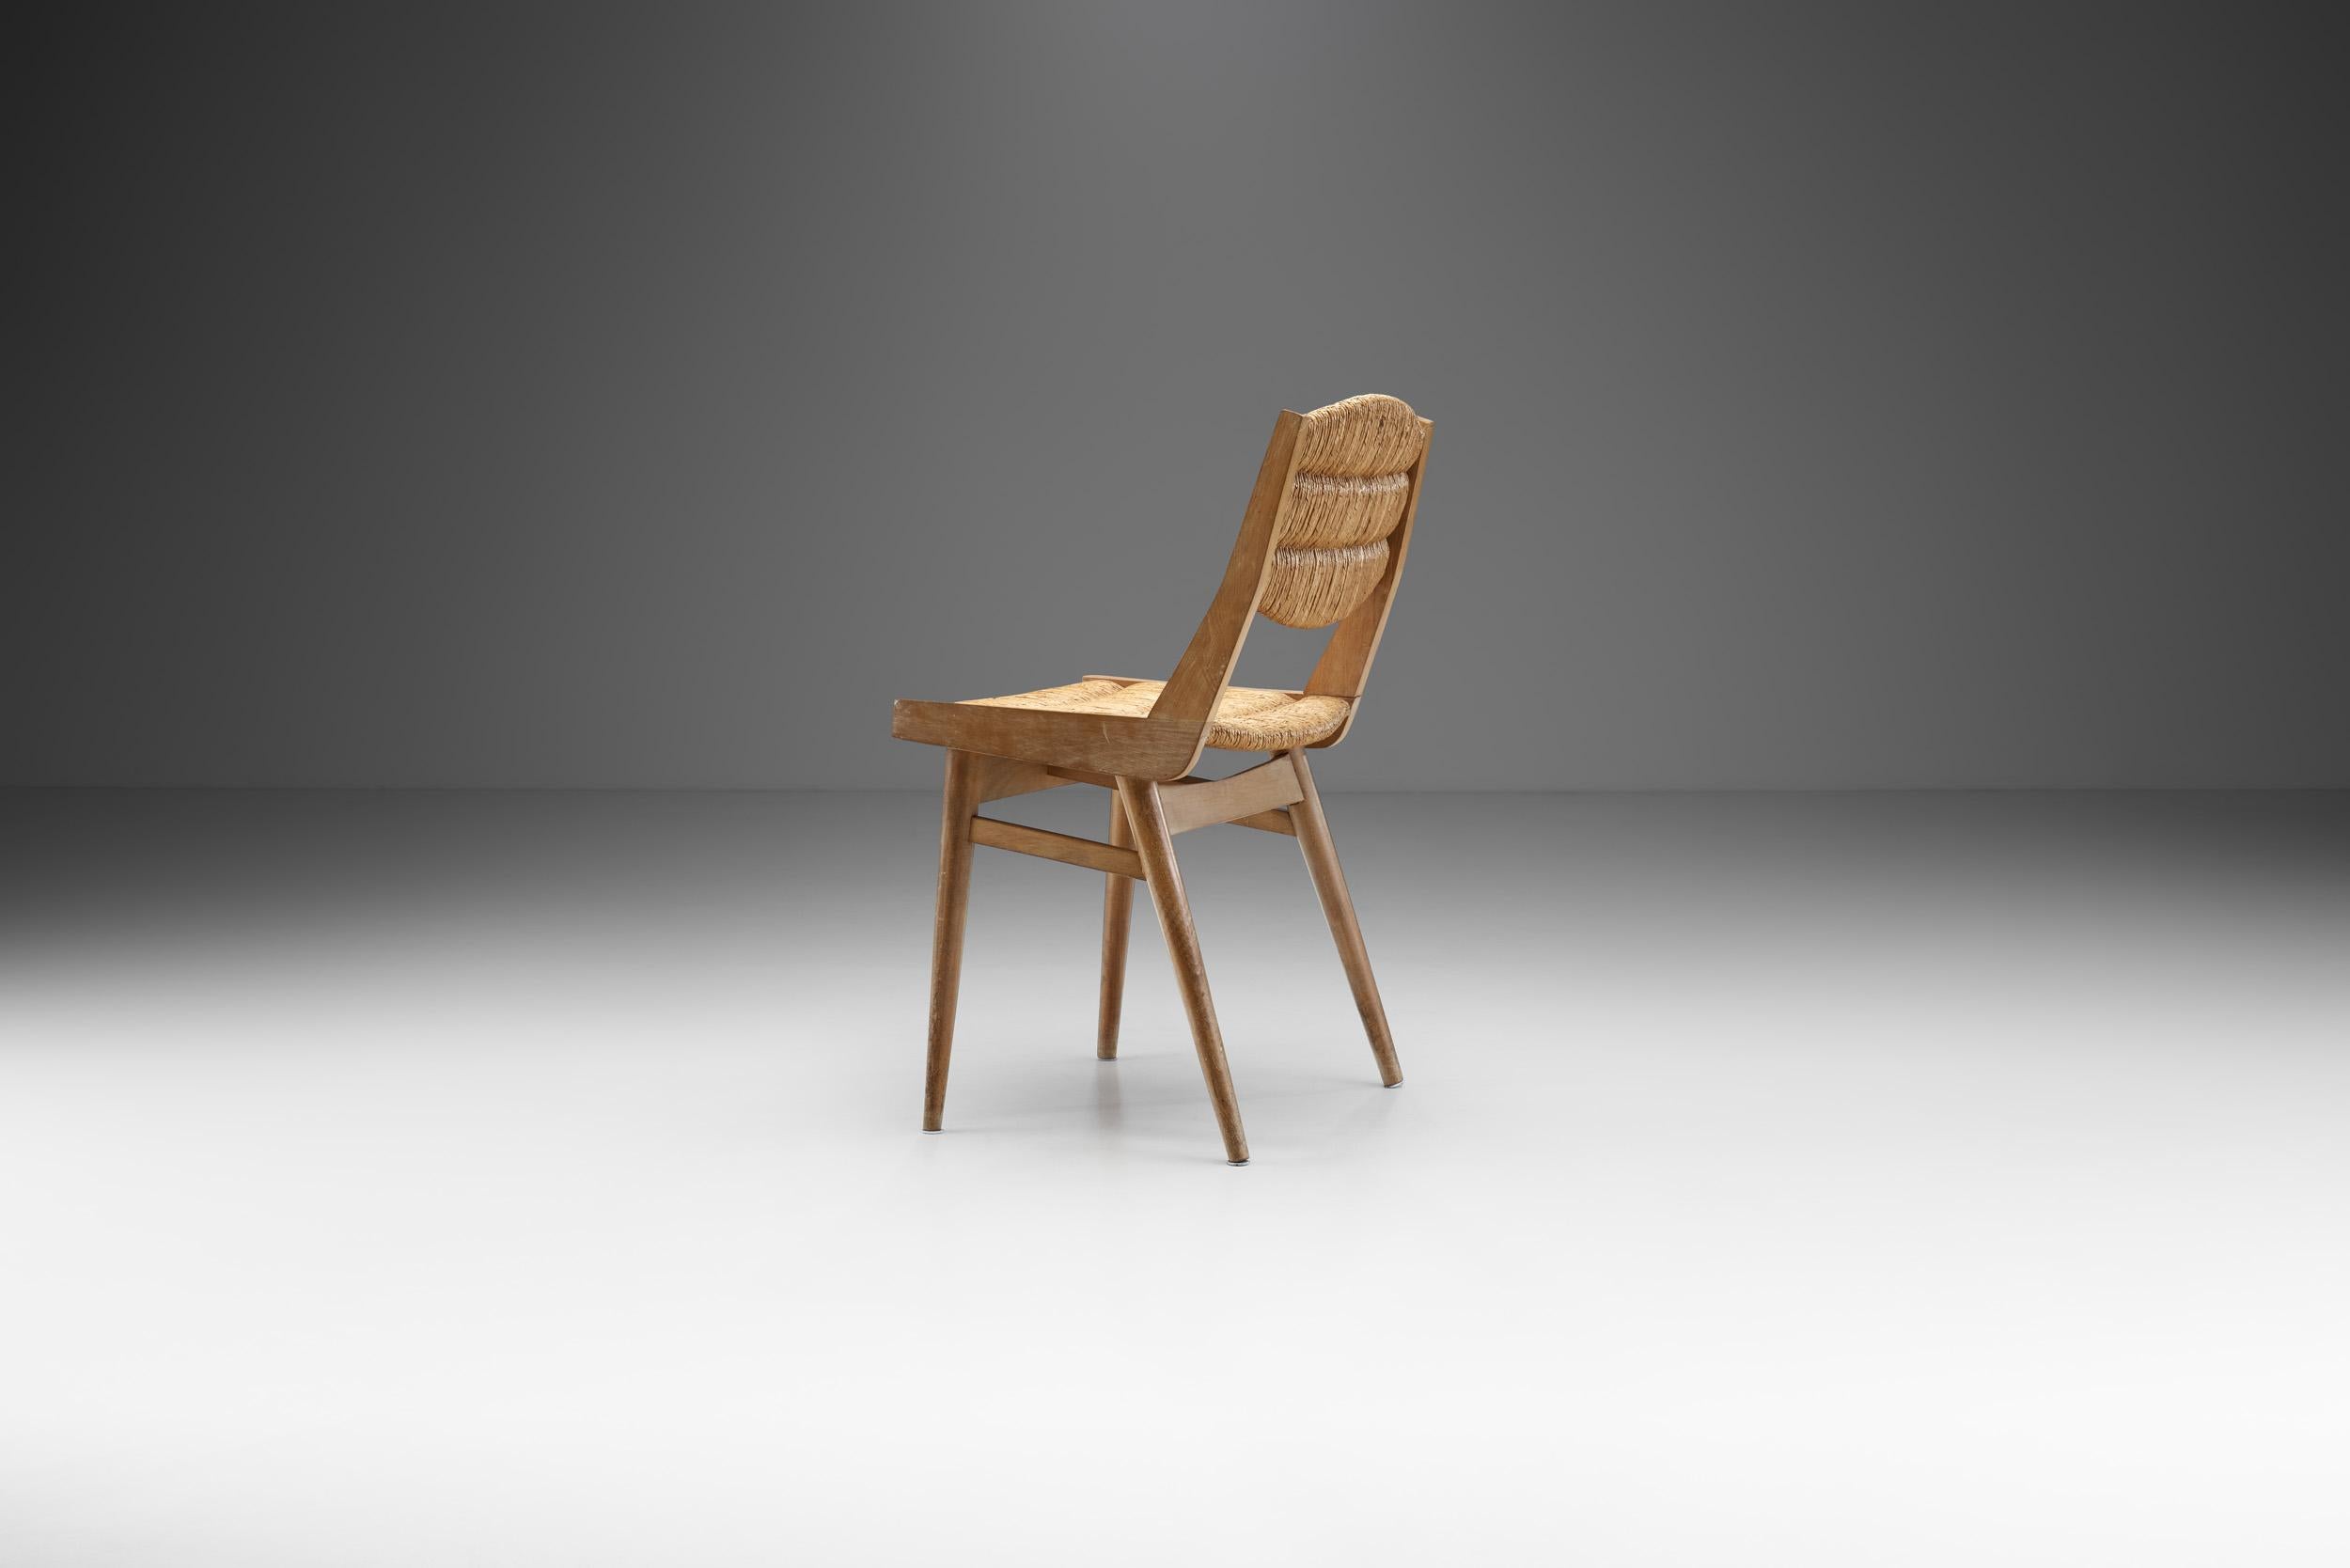 Mid-20th Century French Mid-Century Modern Wood and Cane Chair, France ca 1950s